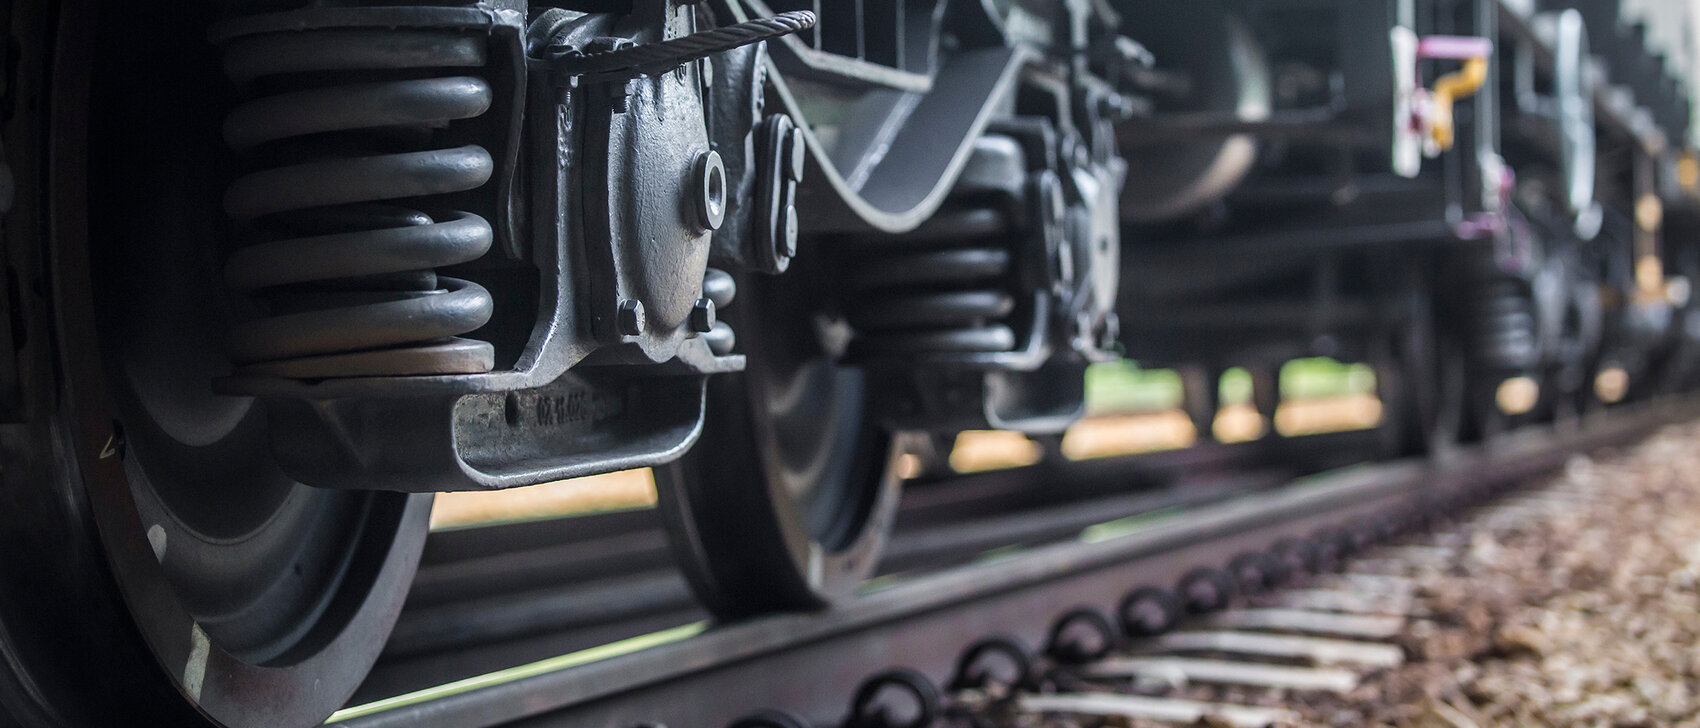 Preventive NDT methods for railway line bolts, train axels and wheels